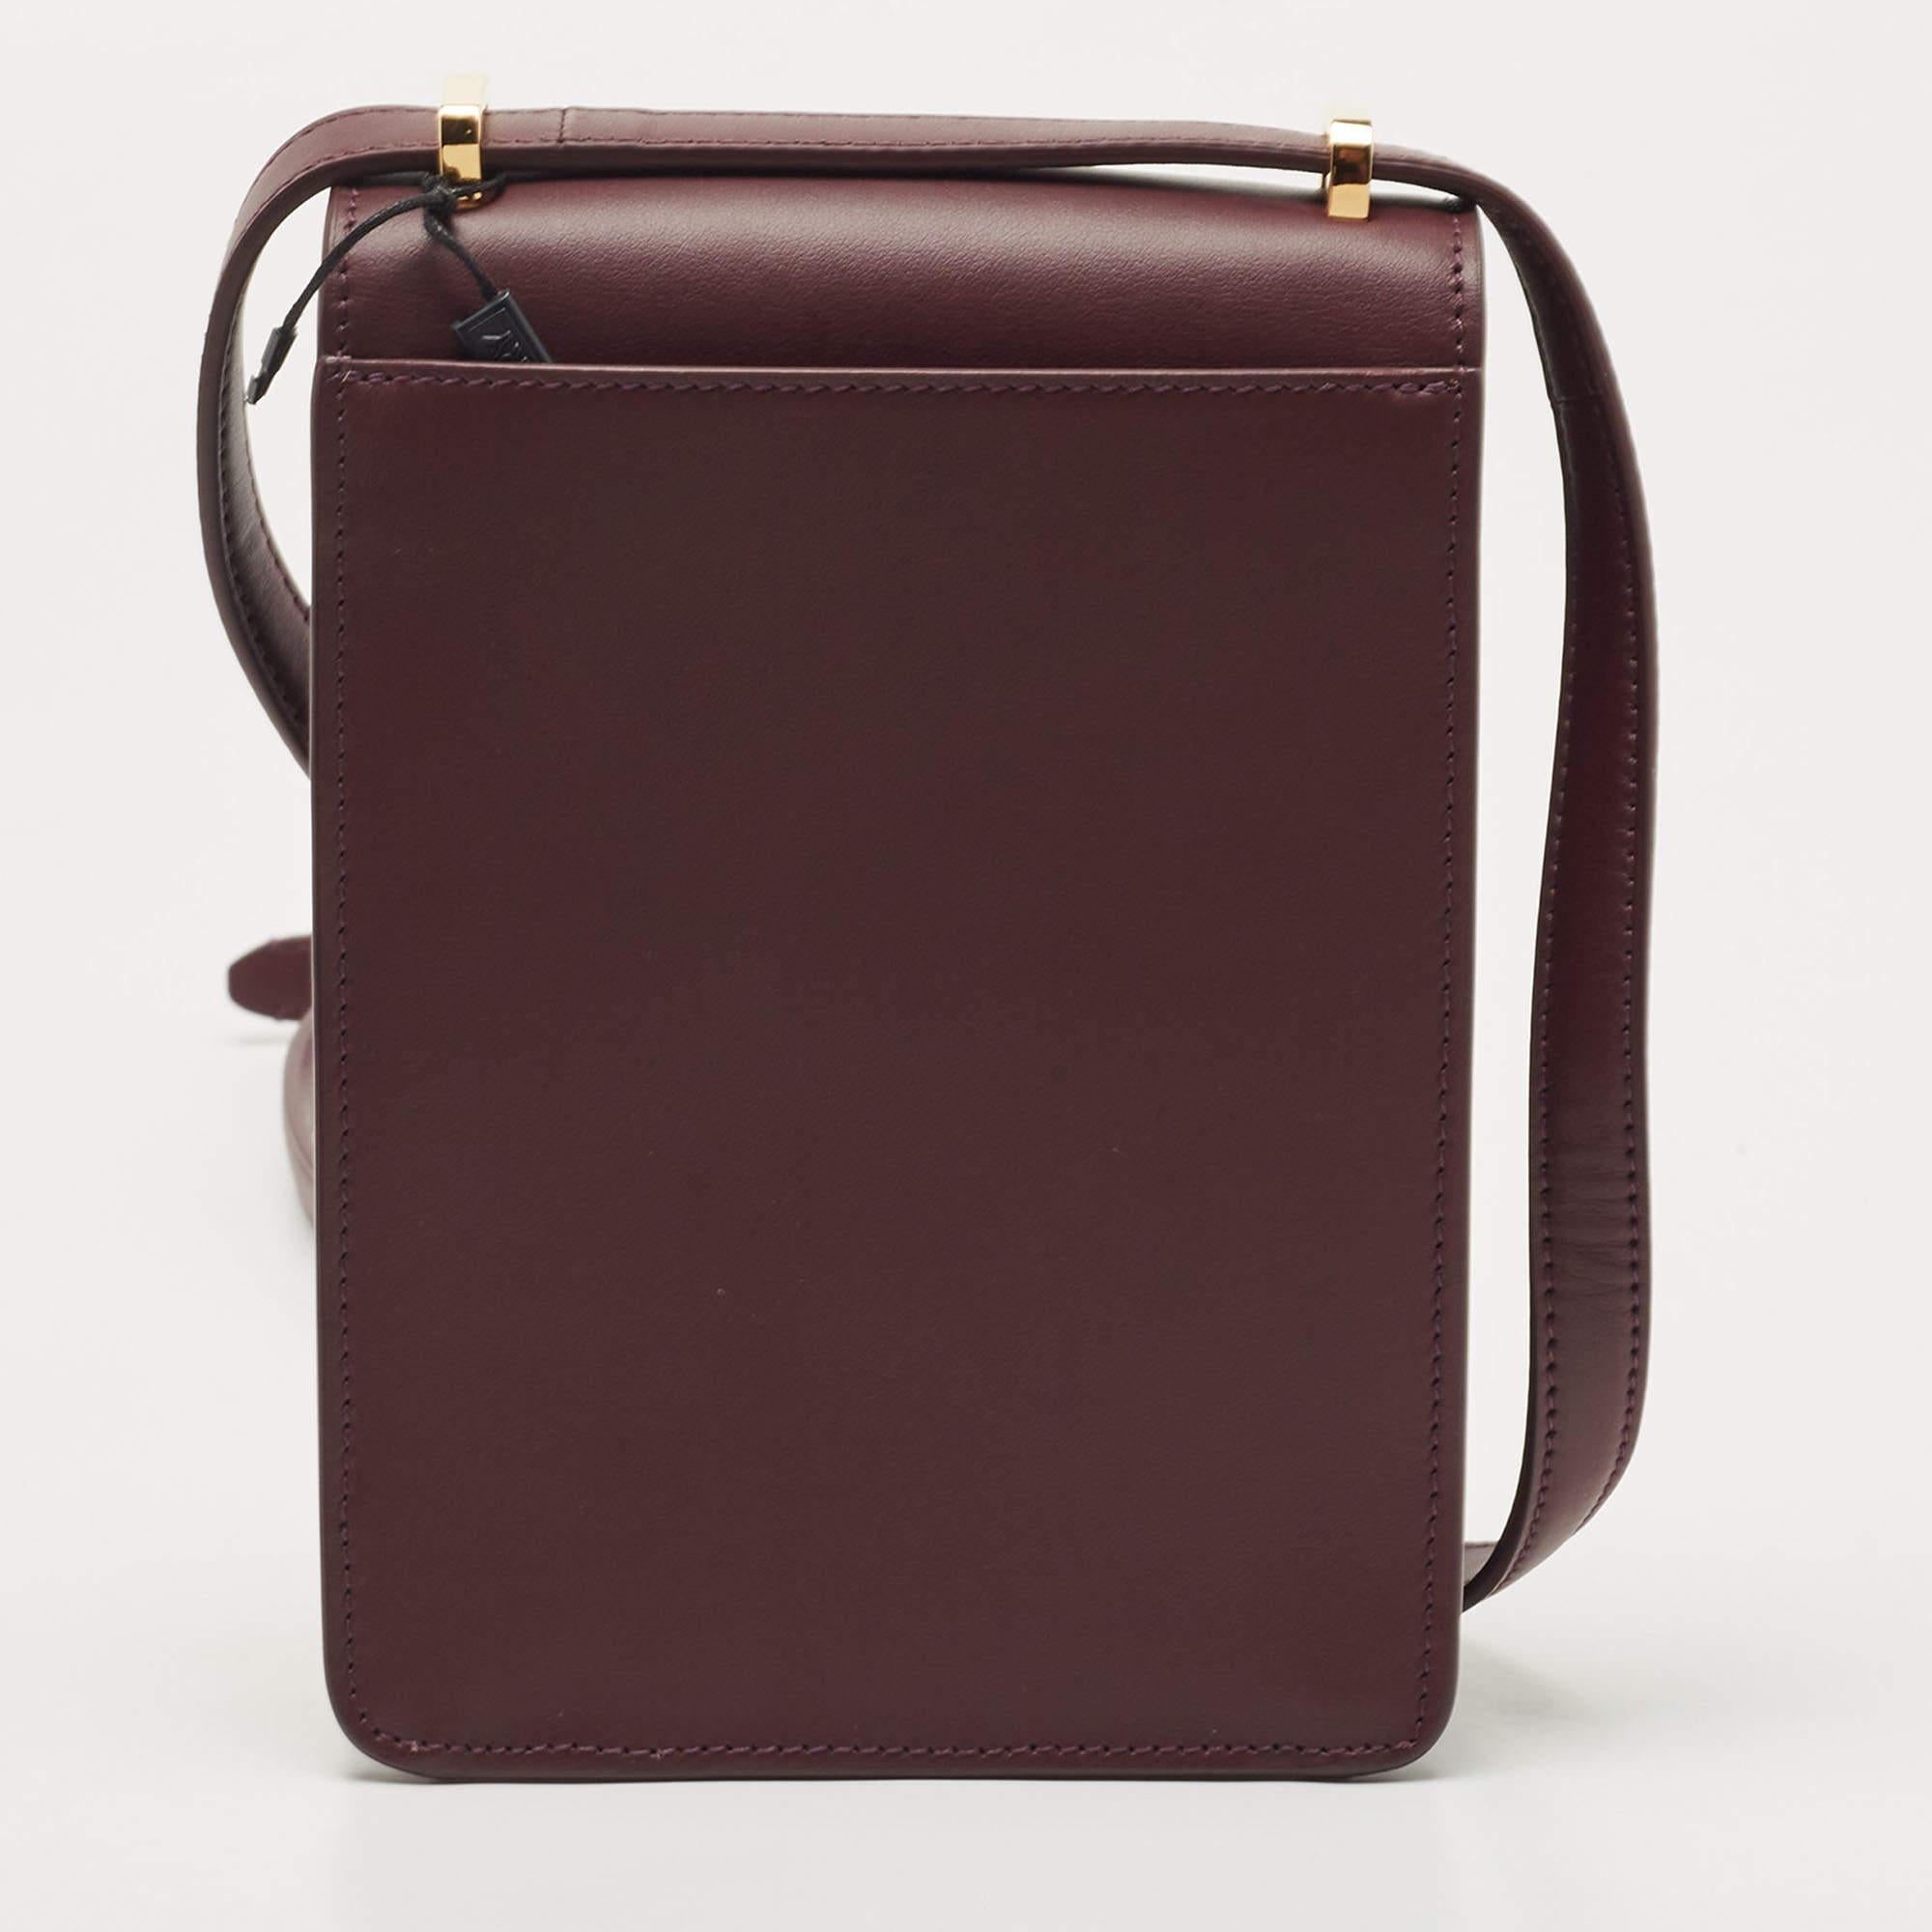 Burberry's Robin crossbody bag is a great investment piece that's super chic too. It's finished with a gold-toned TB clasp on the flap and has a long shoulder strap so that it can be flaunted in a number of ways.

Includes: Original Dustbag, Brand